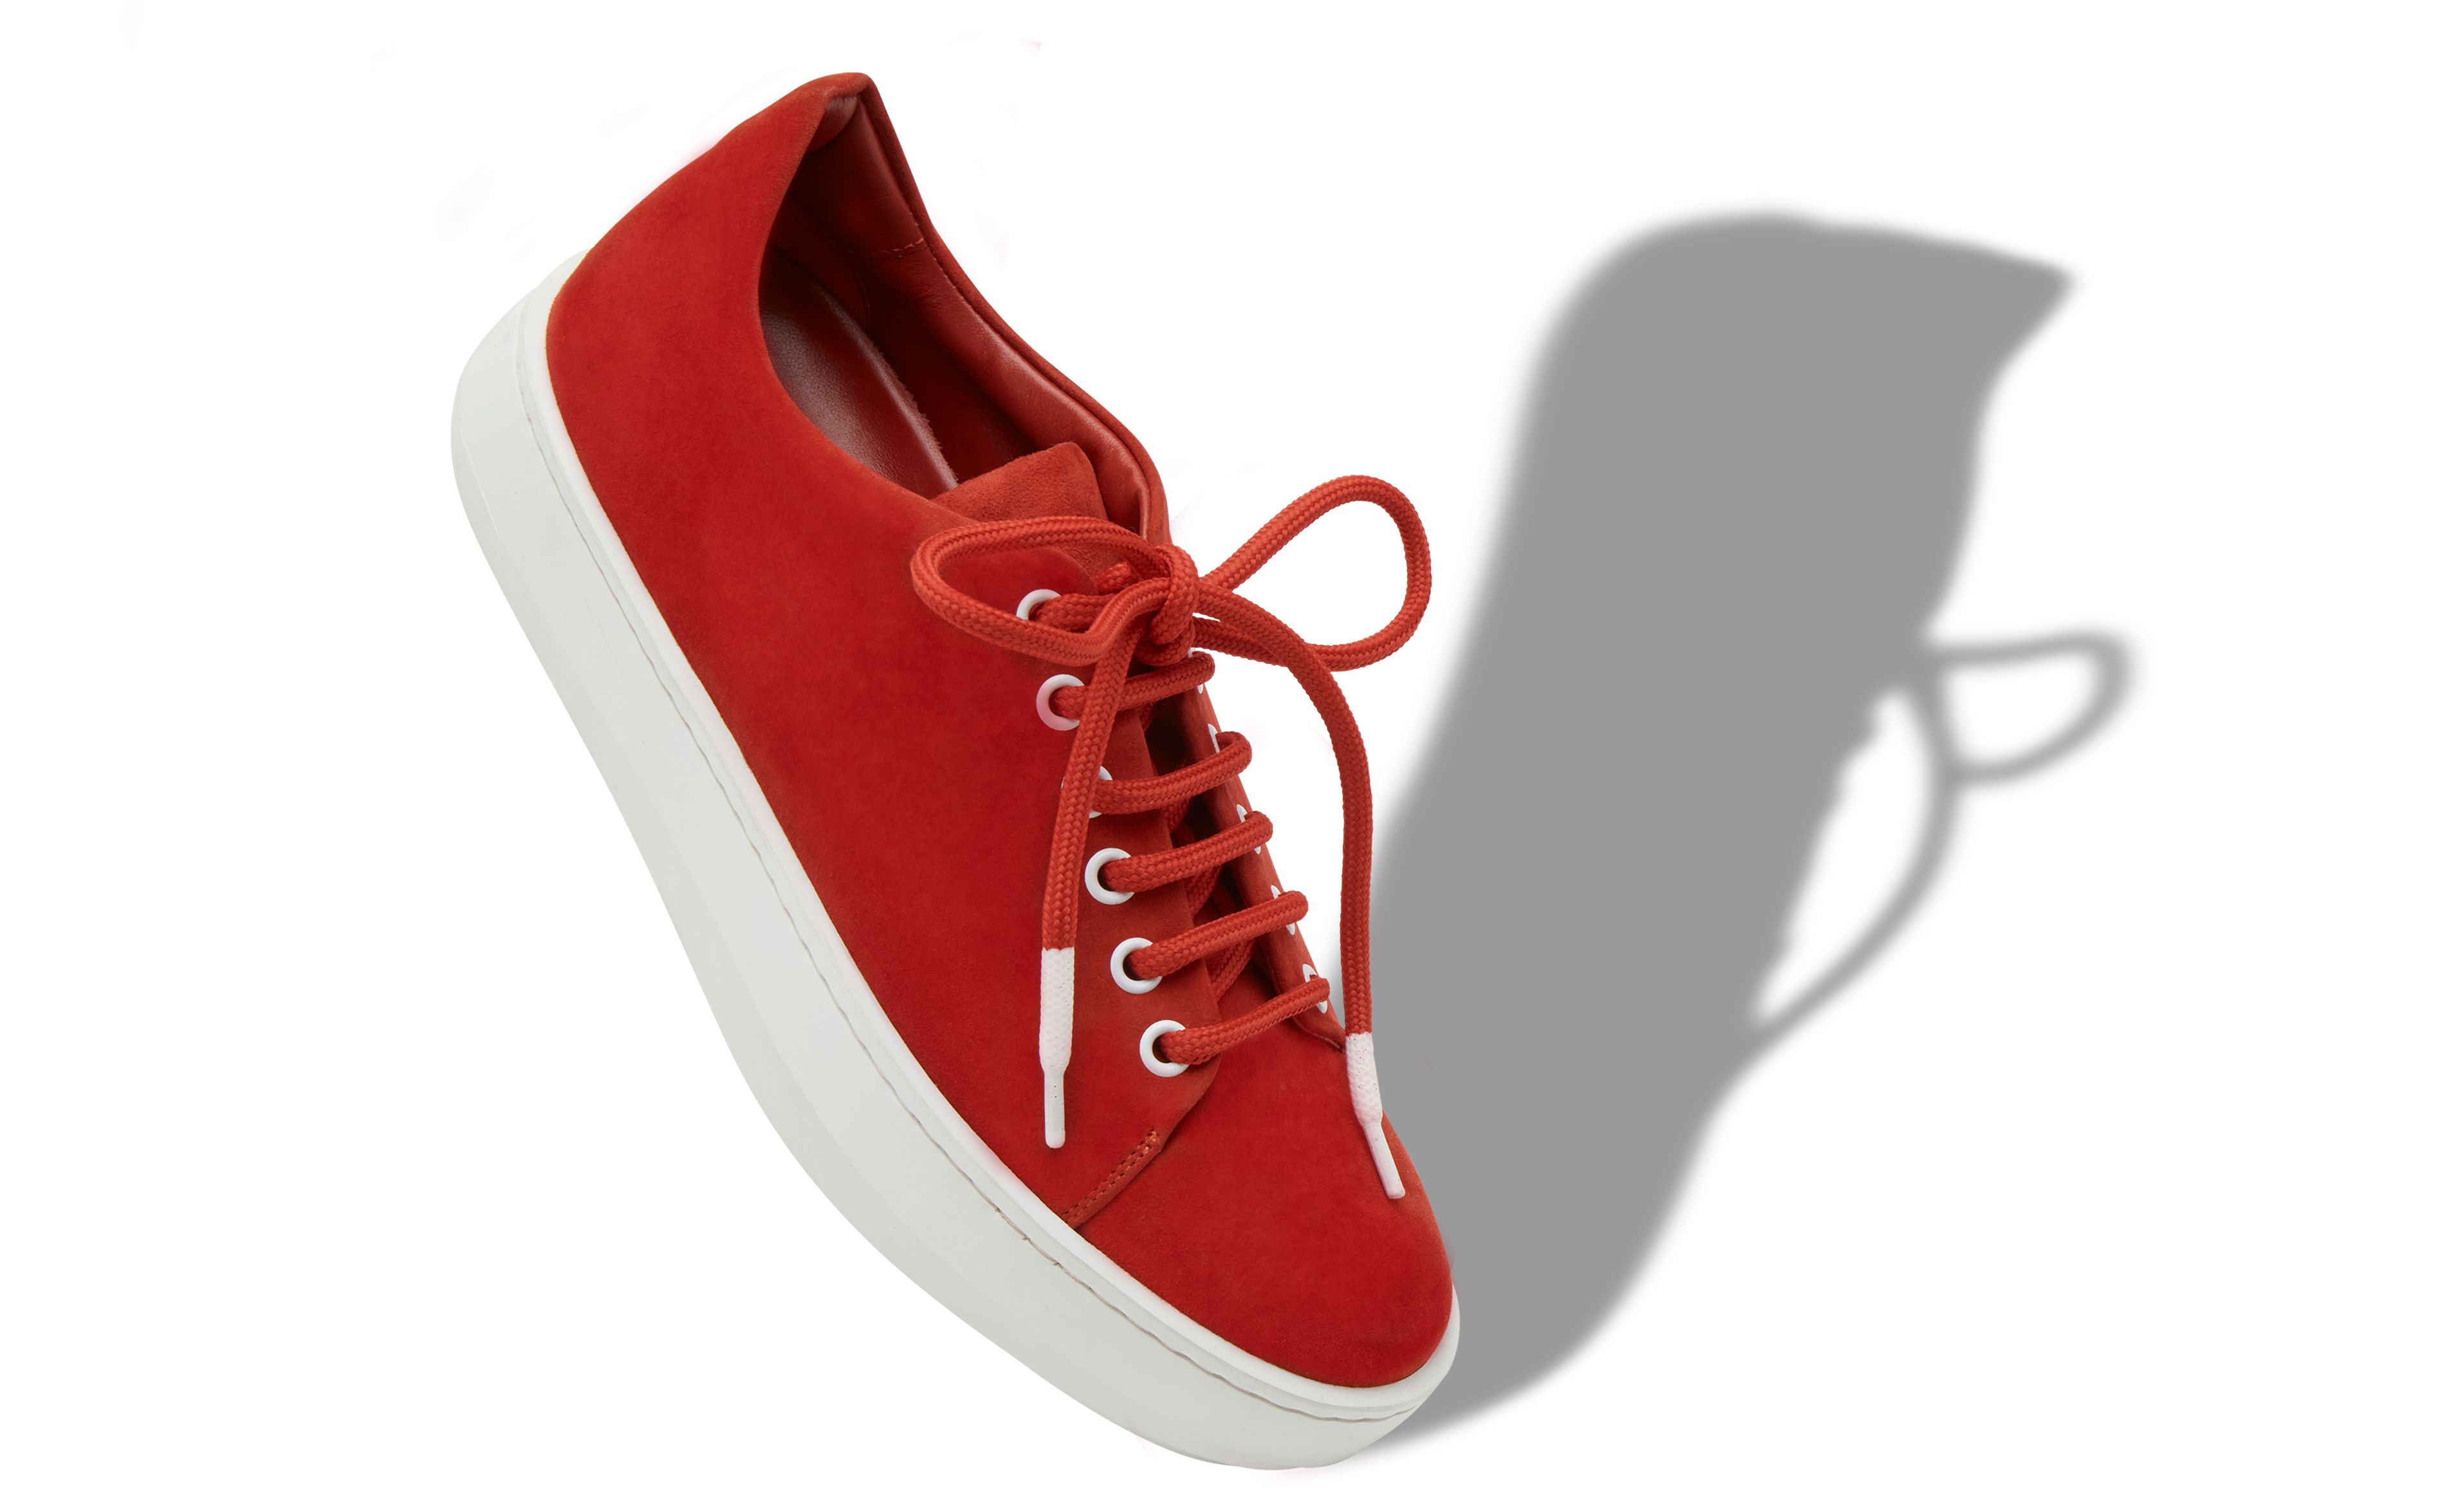 Designer Bright Red Suede Low Cut Sneakers - Image Main